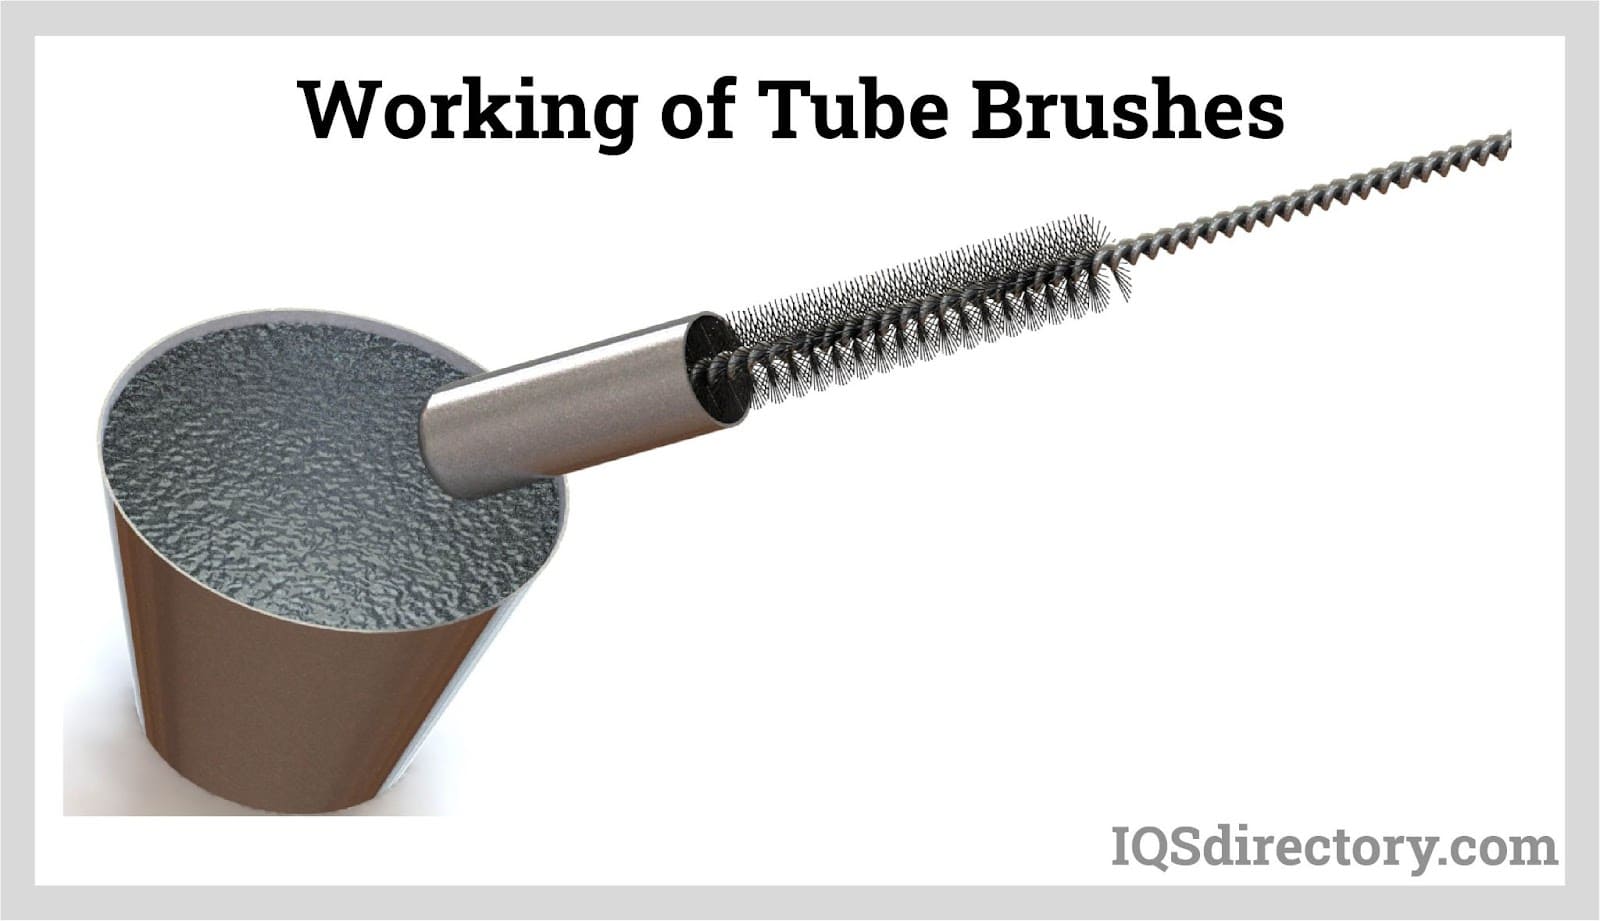 https://www.brushmanufacturers.org/wp-content/uploads/2022/10/working-of-tube-brushes.jpg